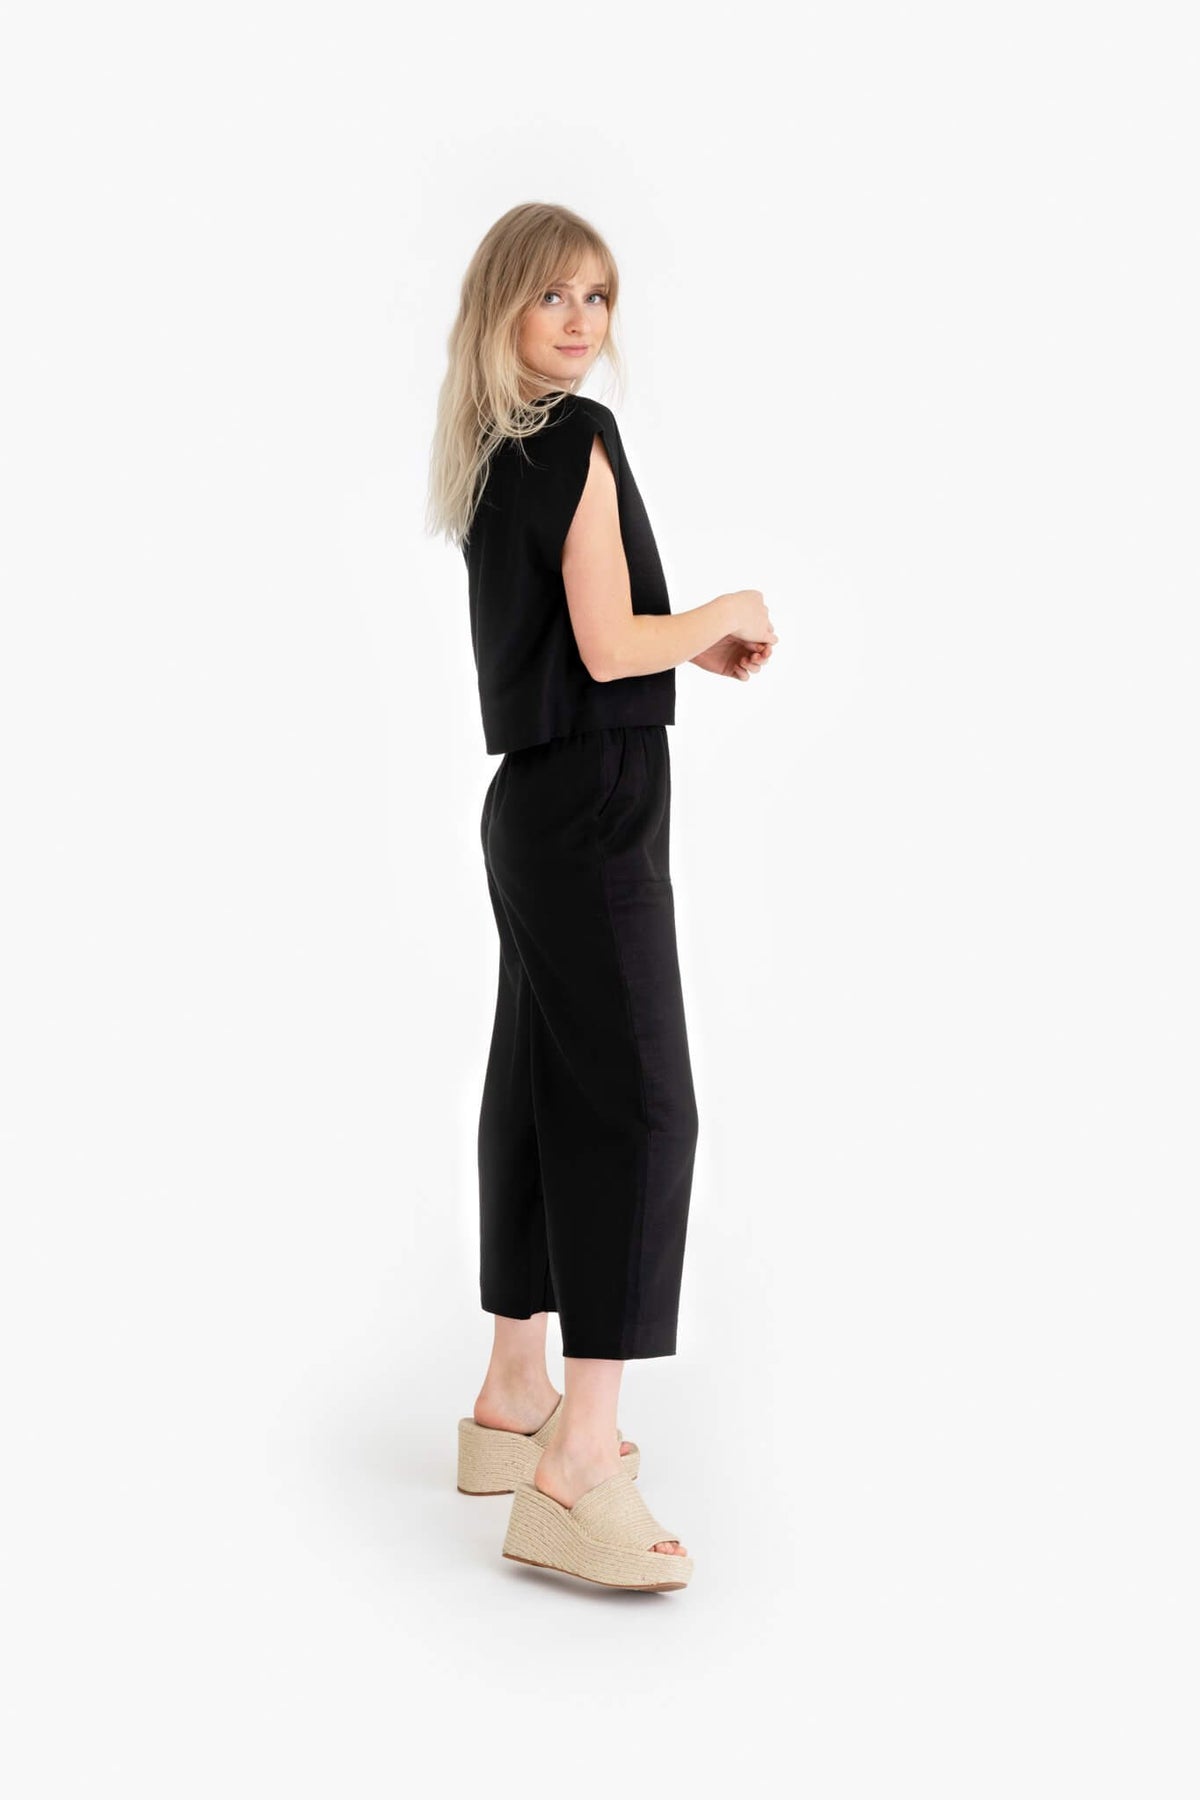 LAUDE The Label Everyday Top in Black